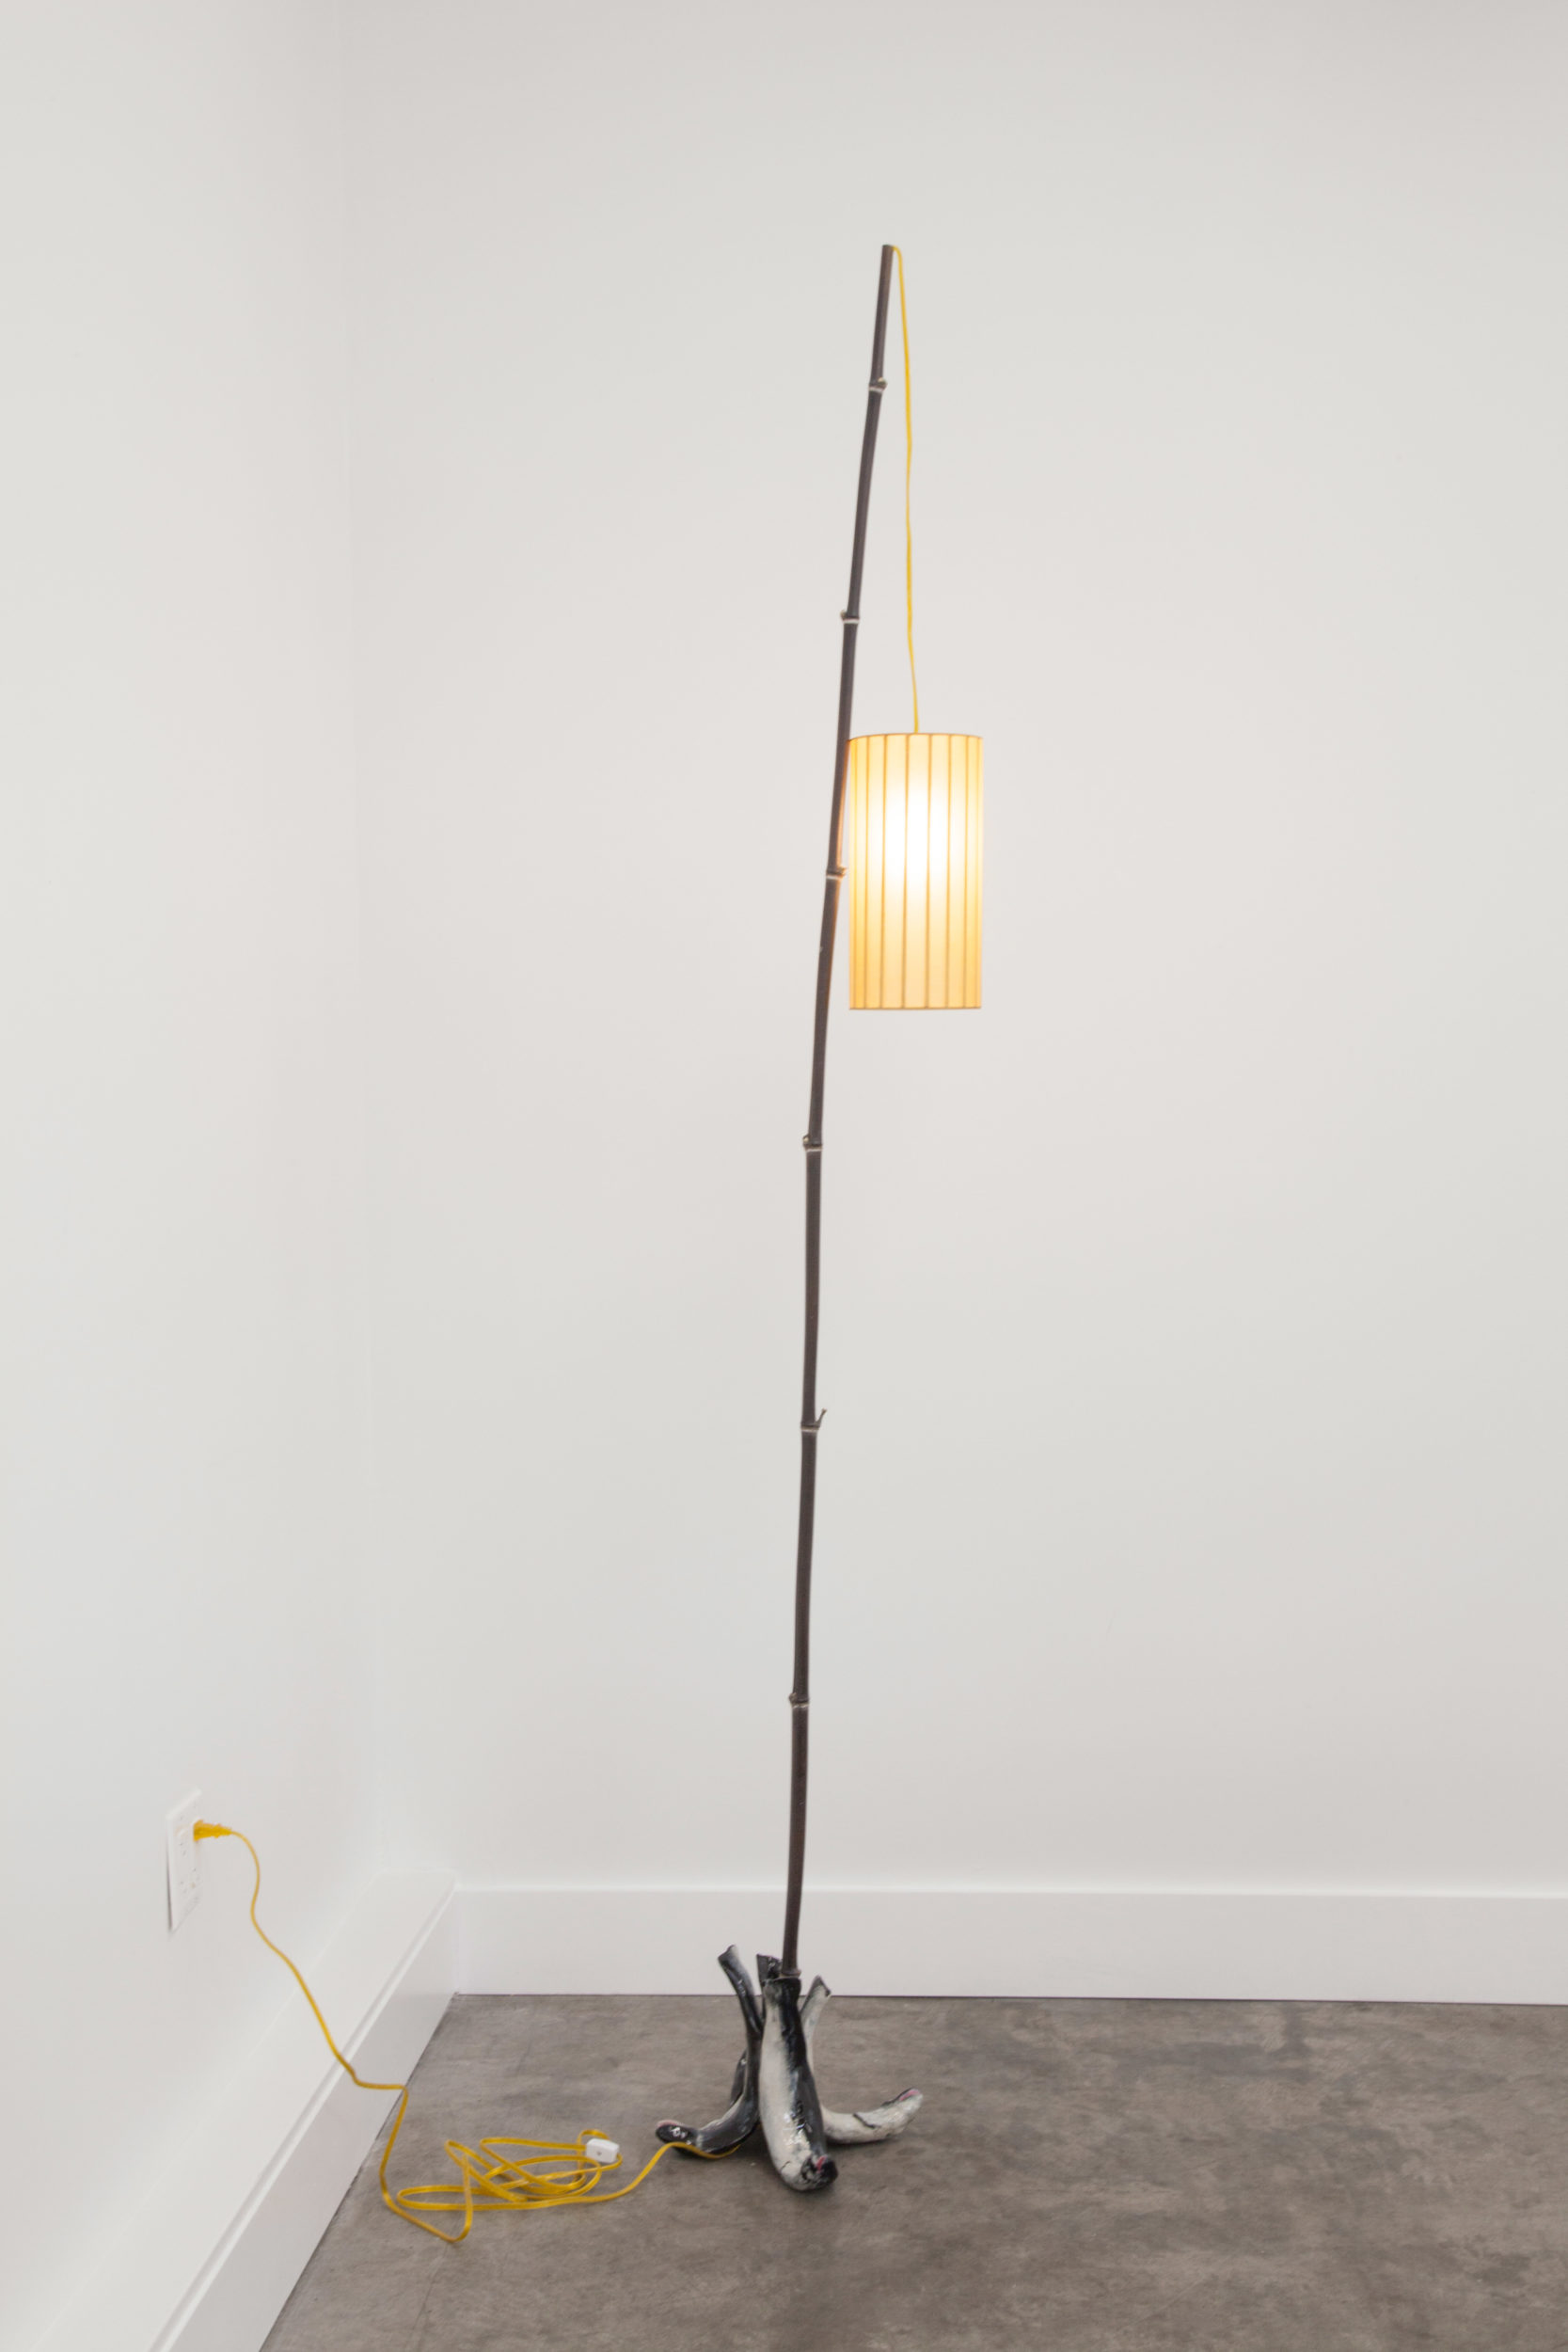 Electrical hardware, cord, bamboo, laquer, paper, light bulb, socket, glazed ceramic, hot glue, wood approx. 24 x 102 in